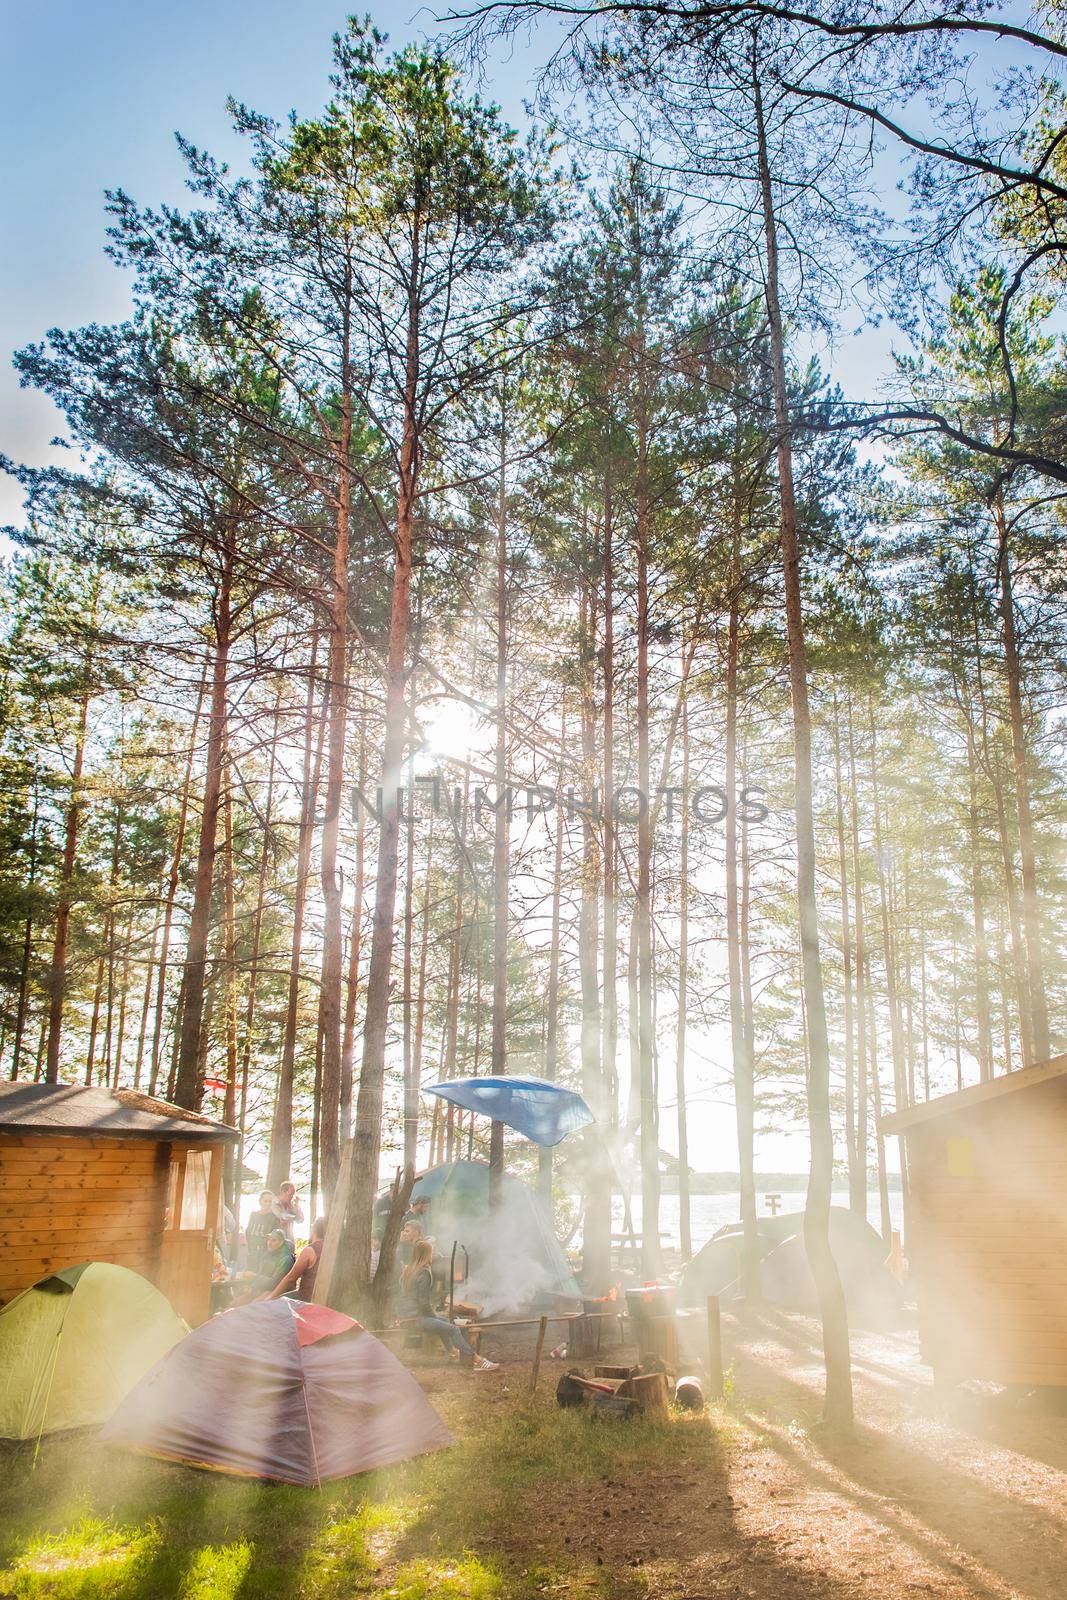 Belarus, Minsk region - June 29, 2019: Camp in the forest outdoor, travel and vacation in tents, camping lifestyle.